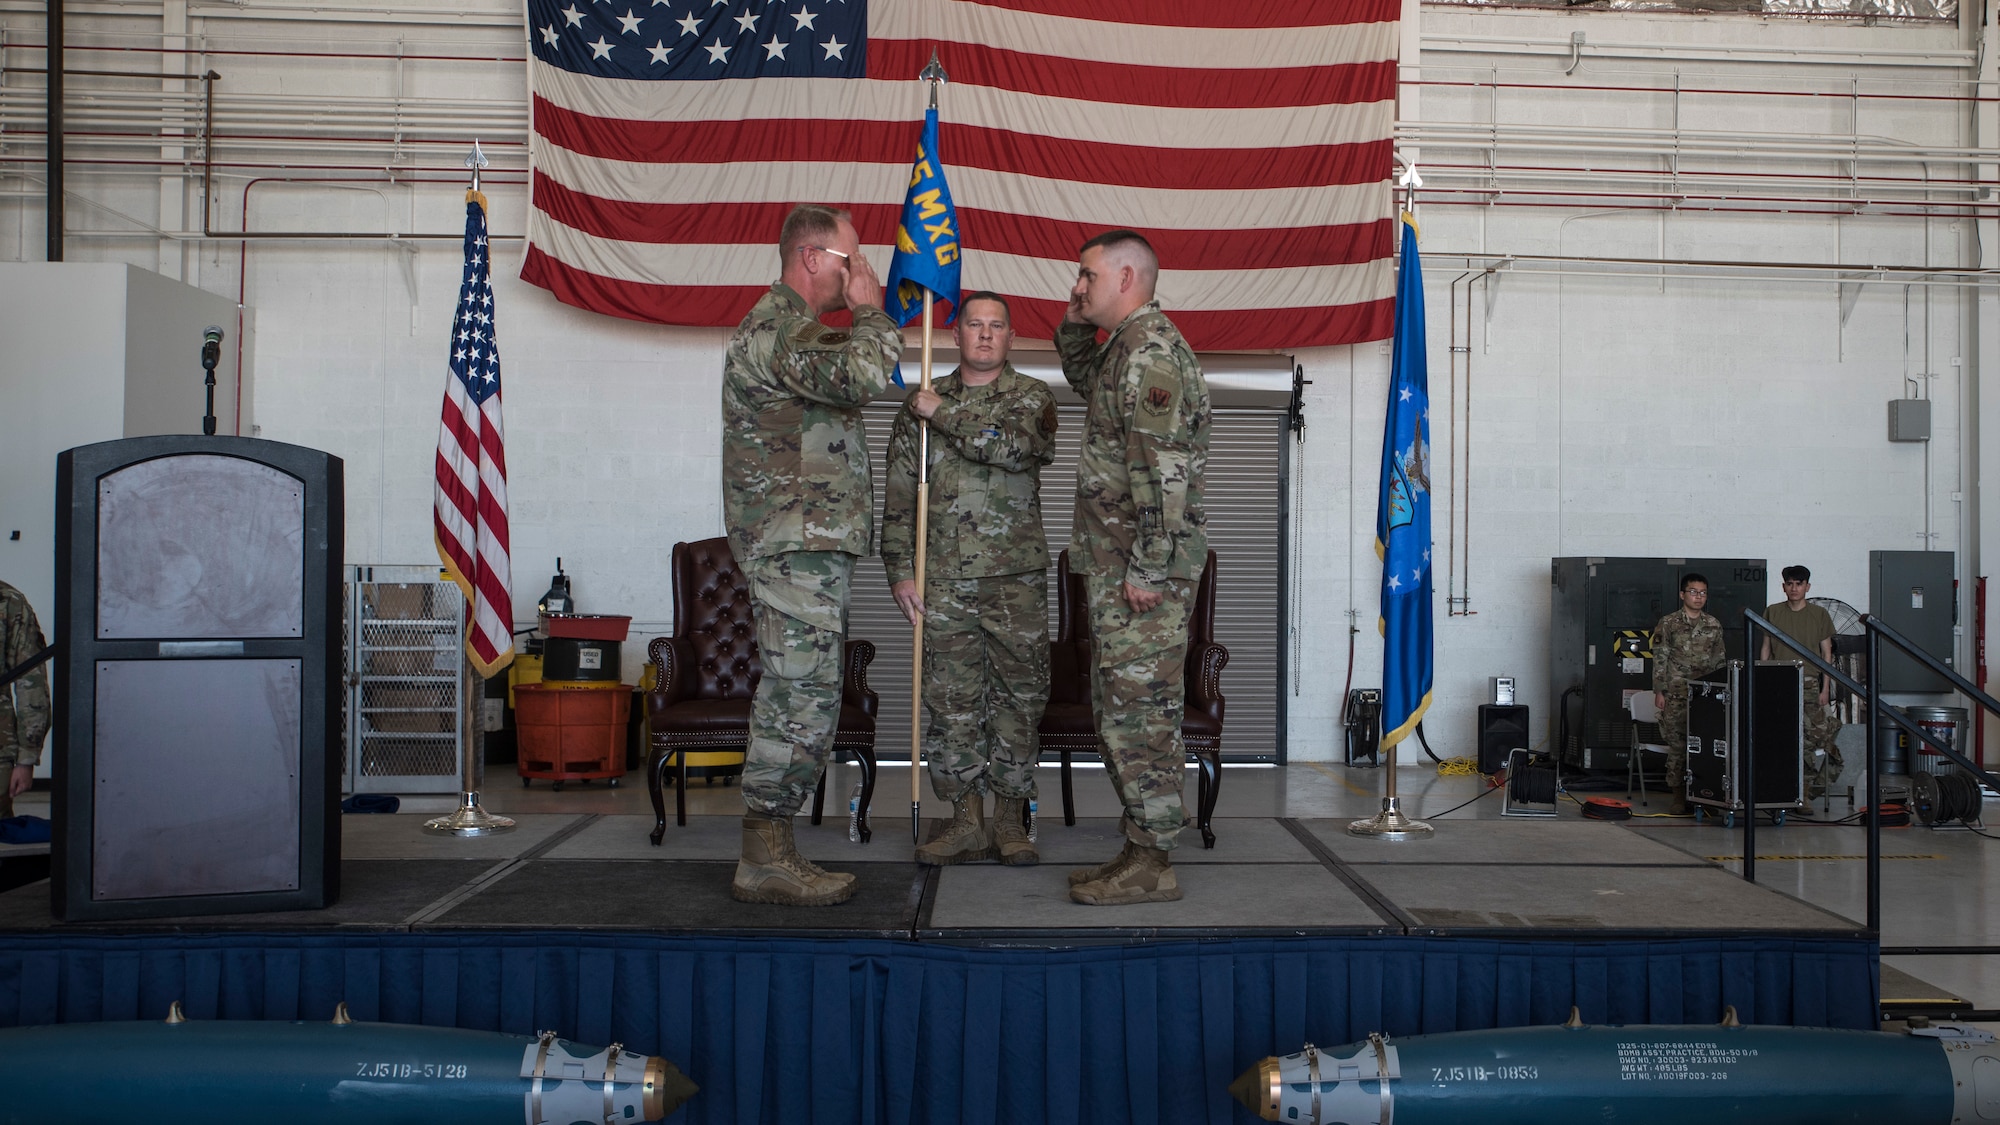 A photo of Airmen during a ceremony